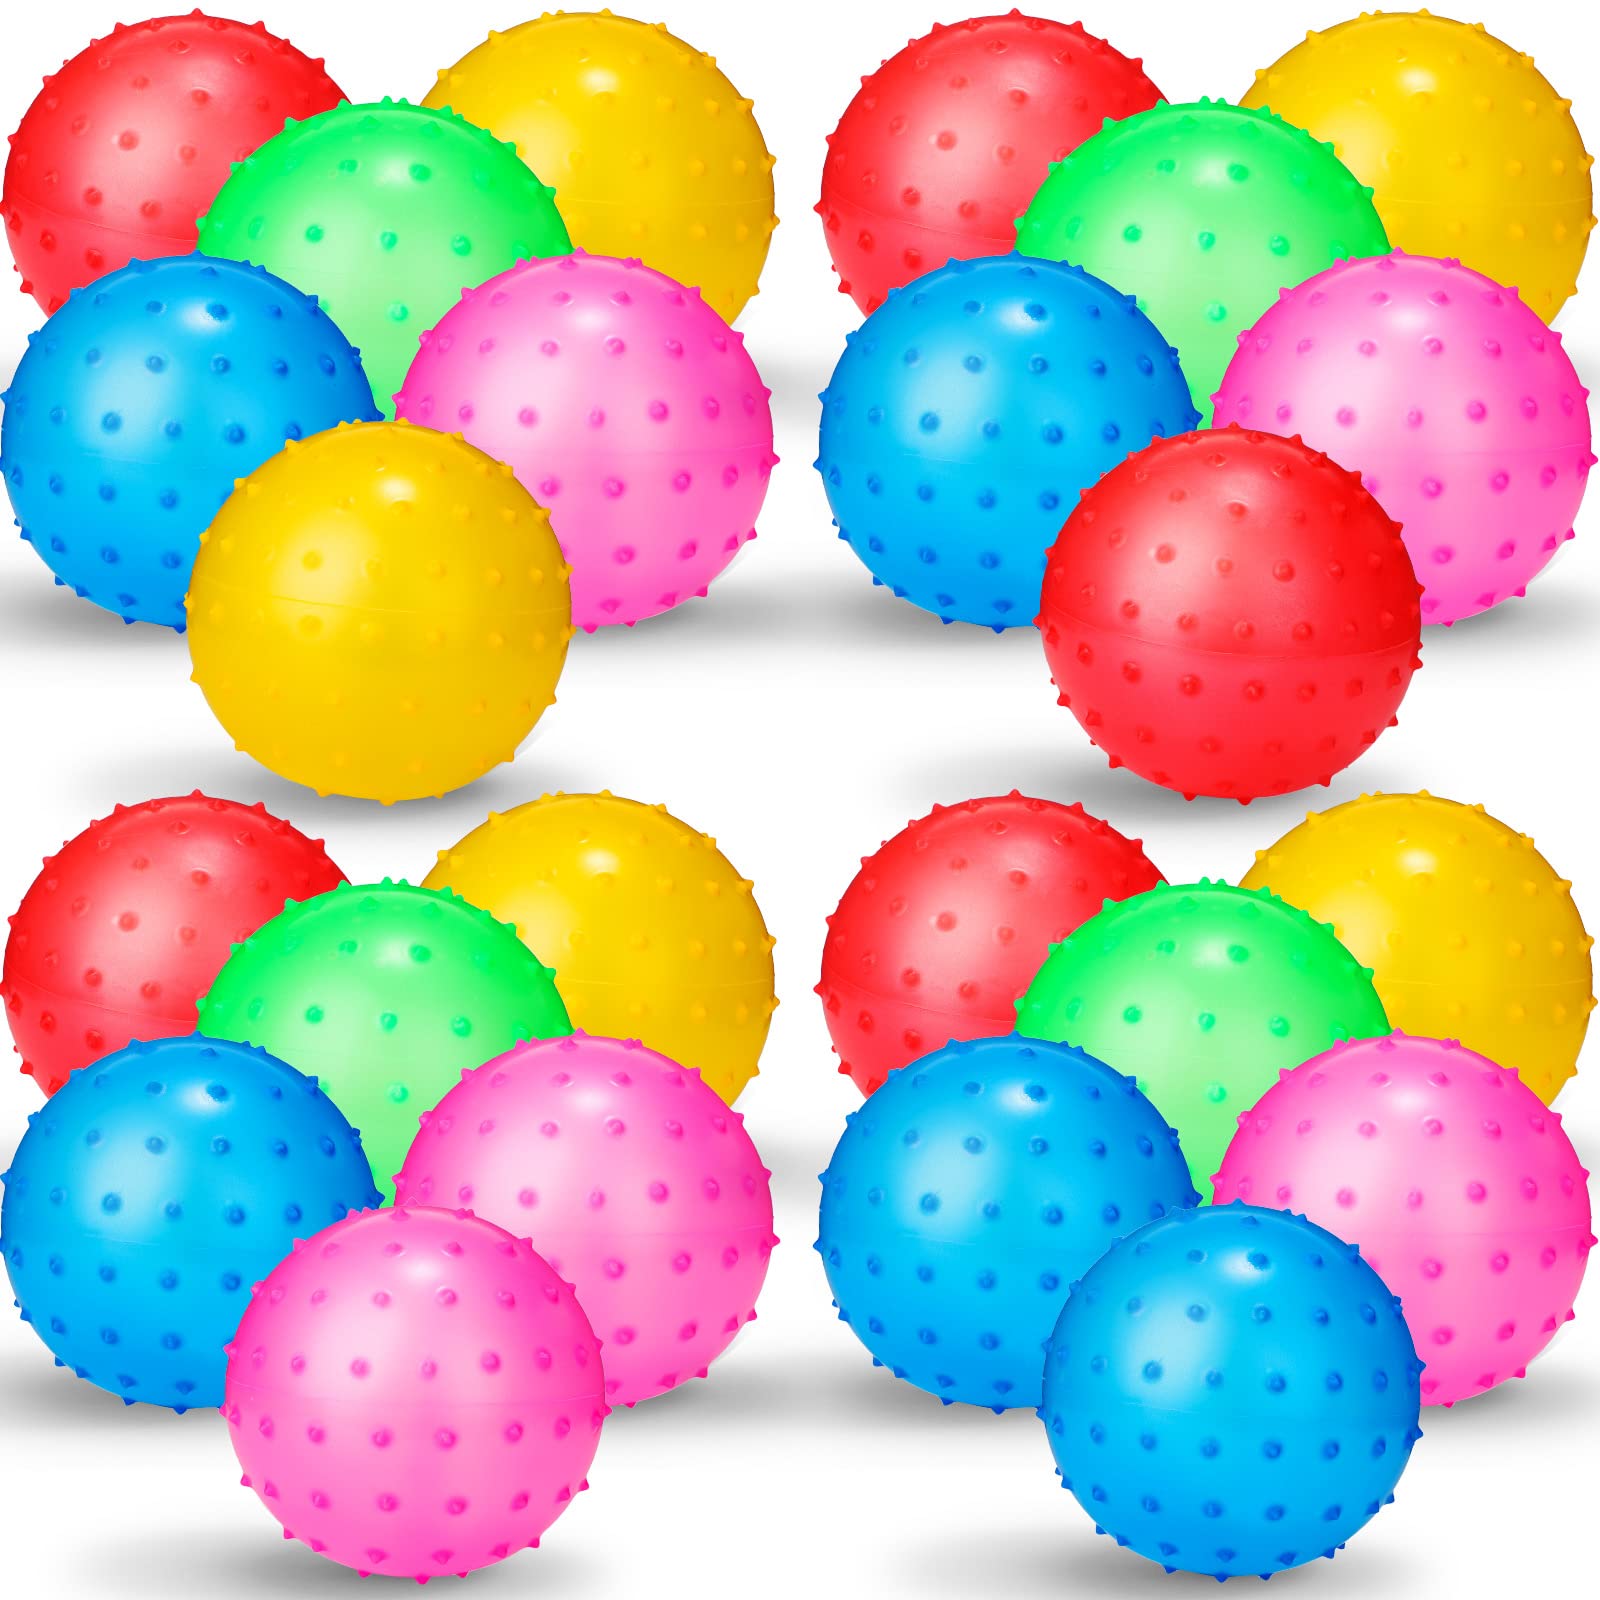 Jerify 24 Pieces Knobby Balls Spiky Bounce Ball Toy Large Bouncy Balls Bulk Inflatable Sensory Balls Soft Massage Stress Plastic Balls for School Party Play Outdoor Indoor